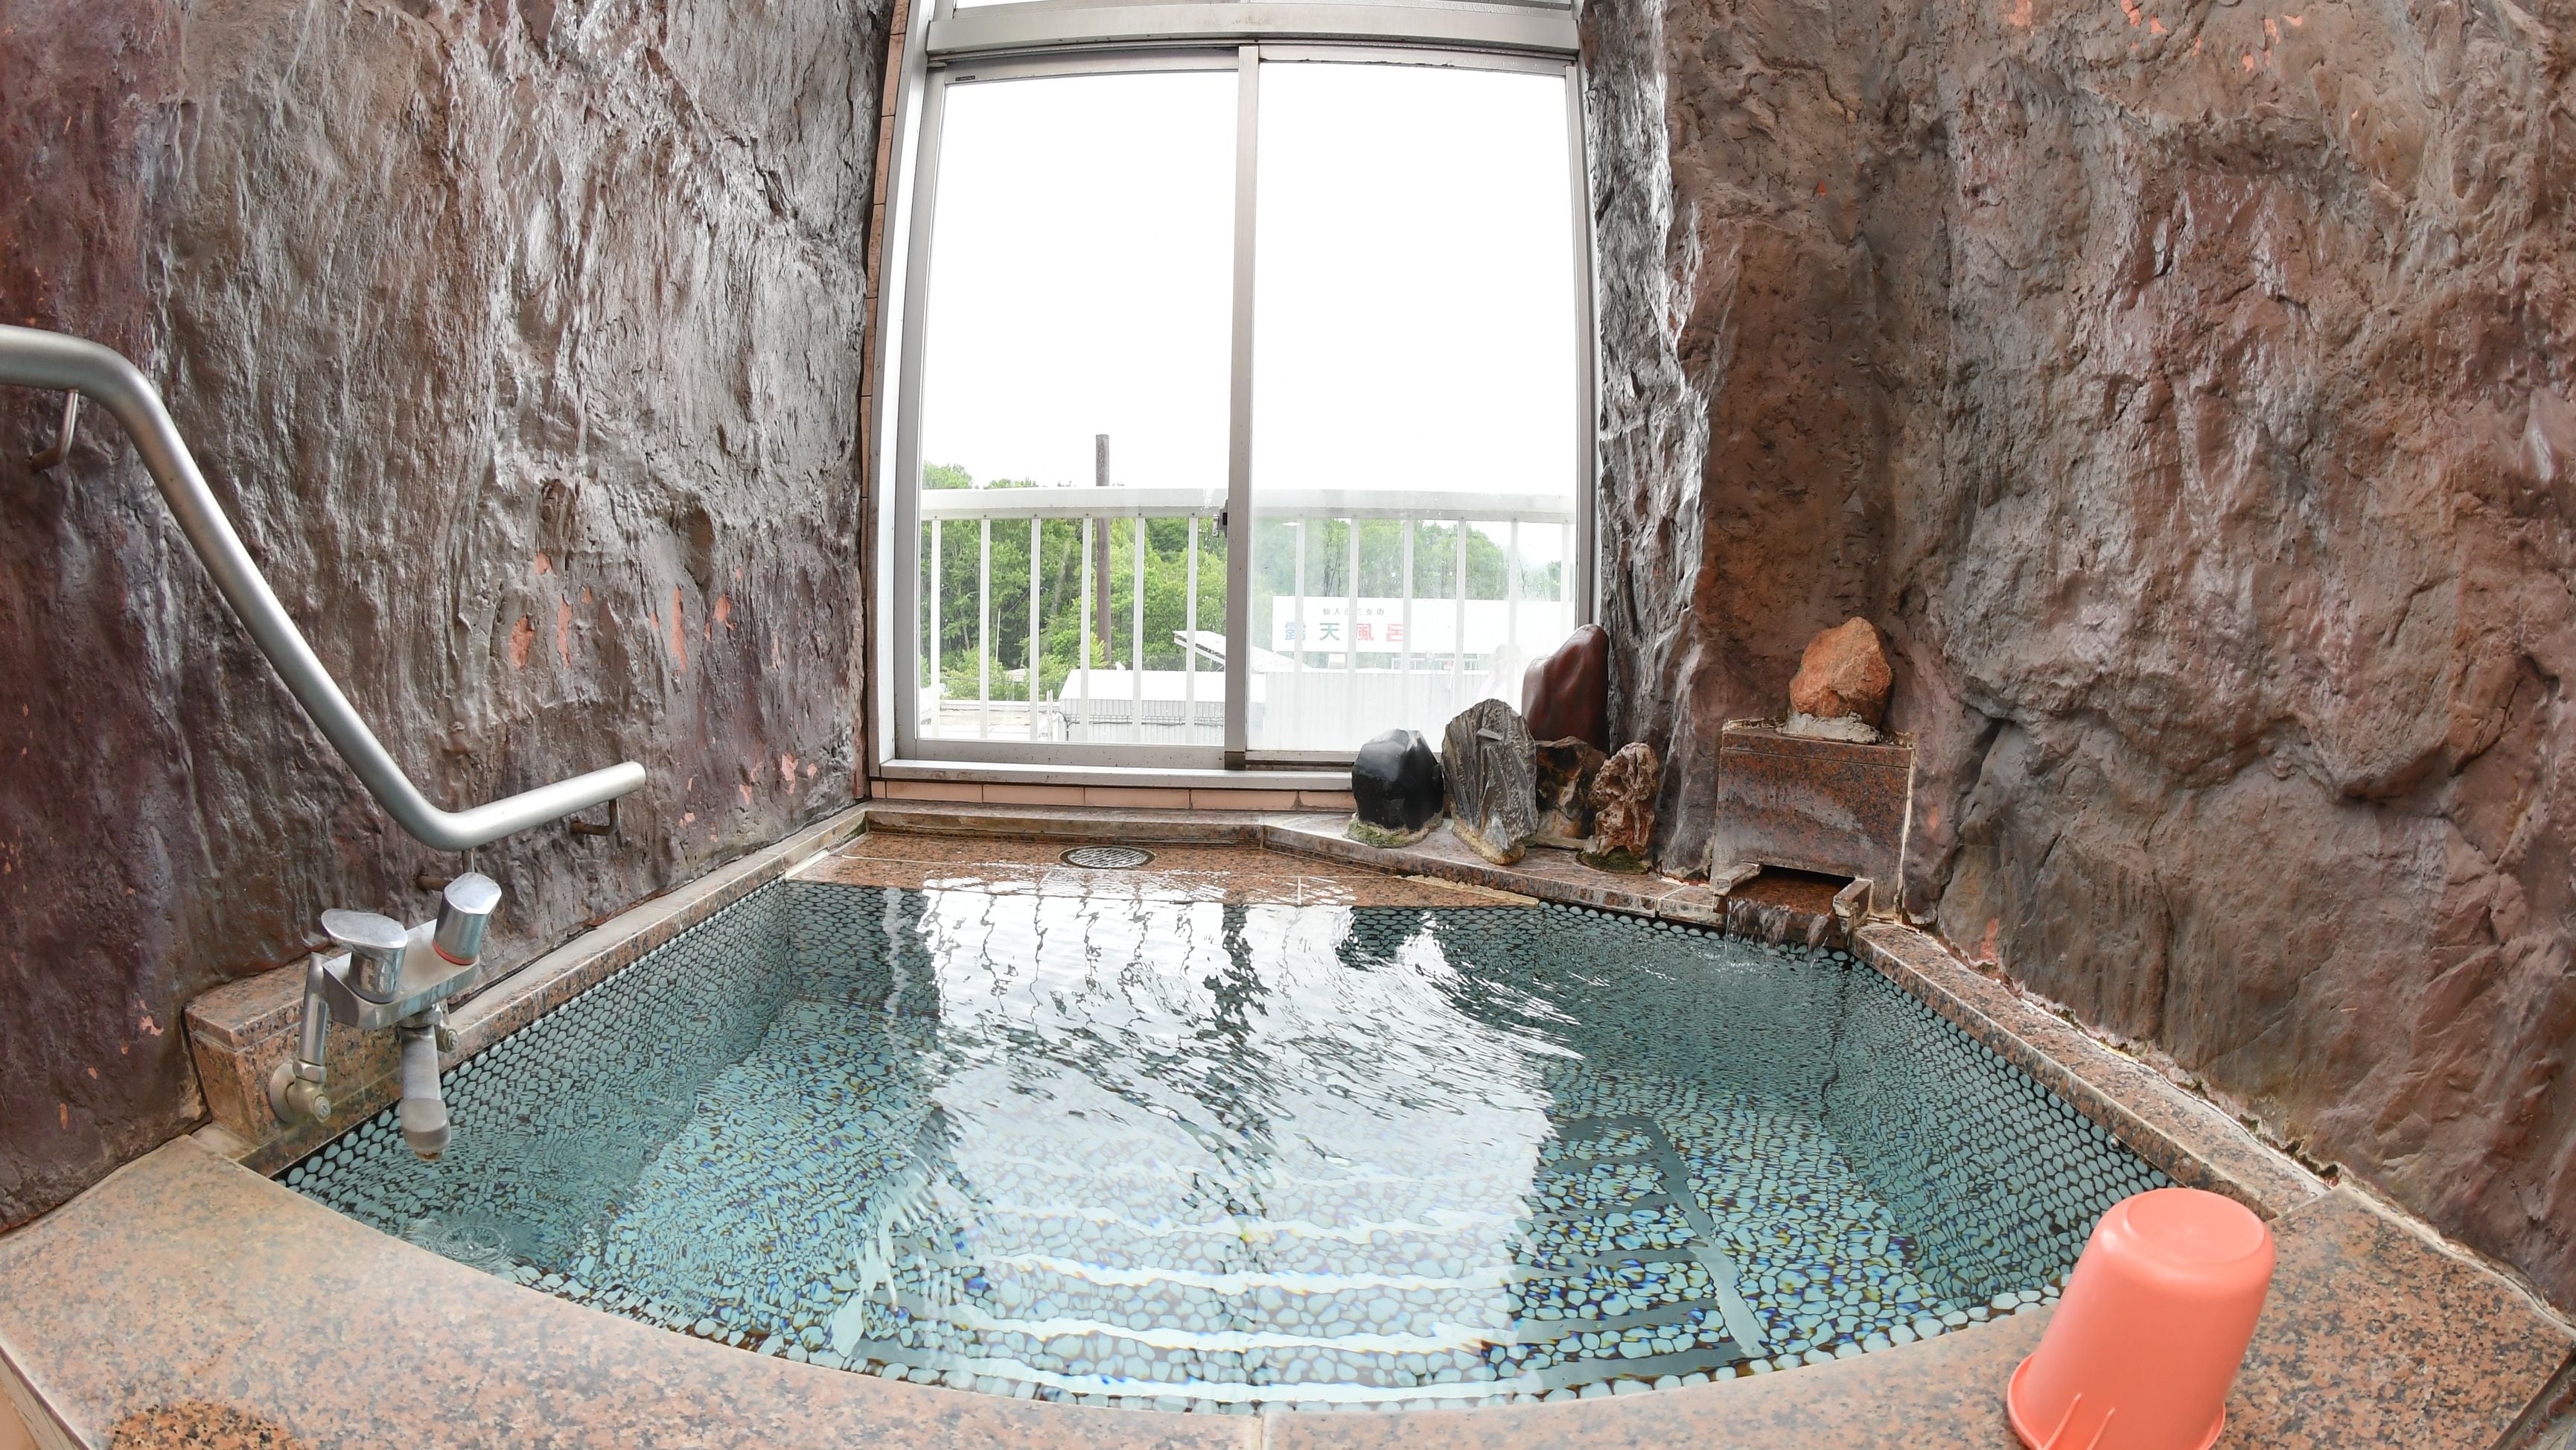 ◆ Japanese-style room with rock bath The best view from the bath. The rock bath is a natural hot spring.